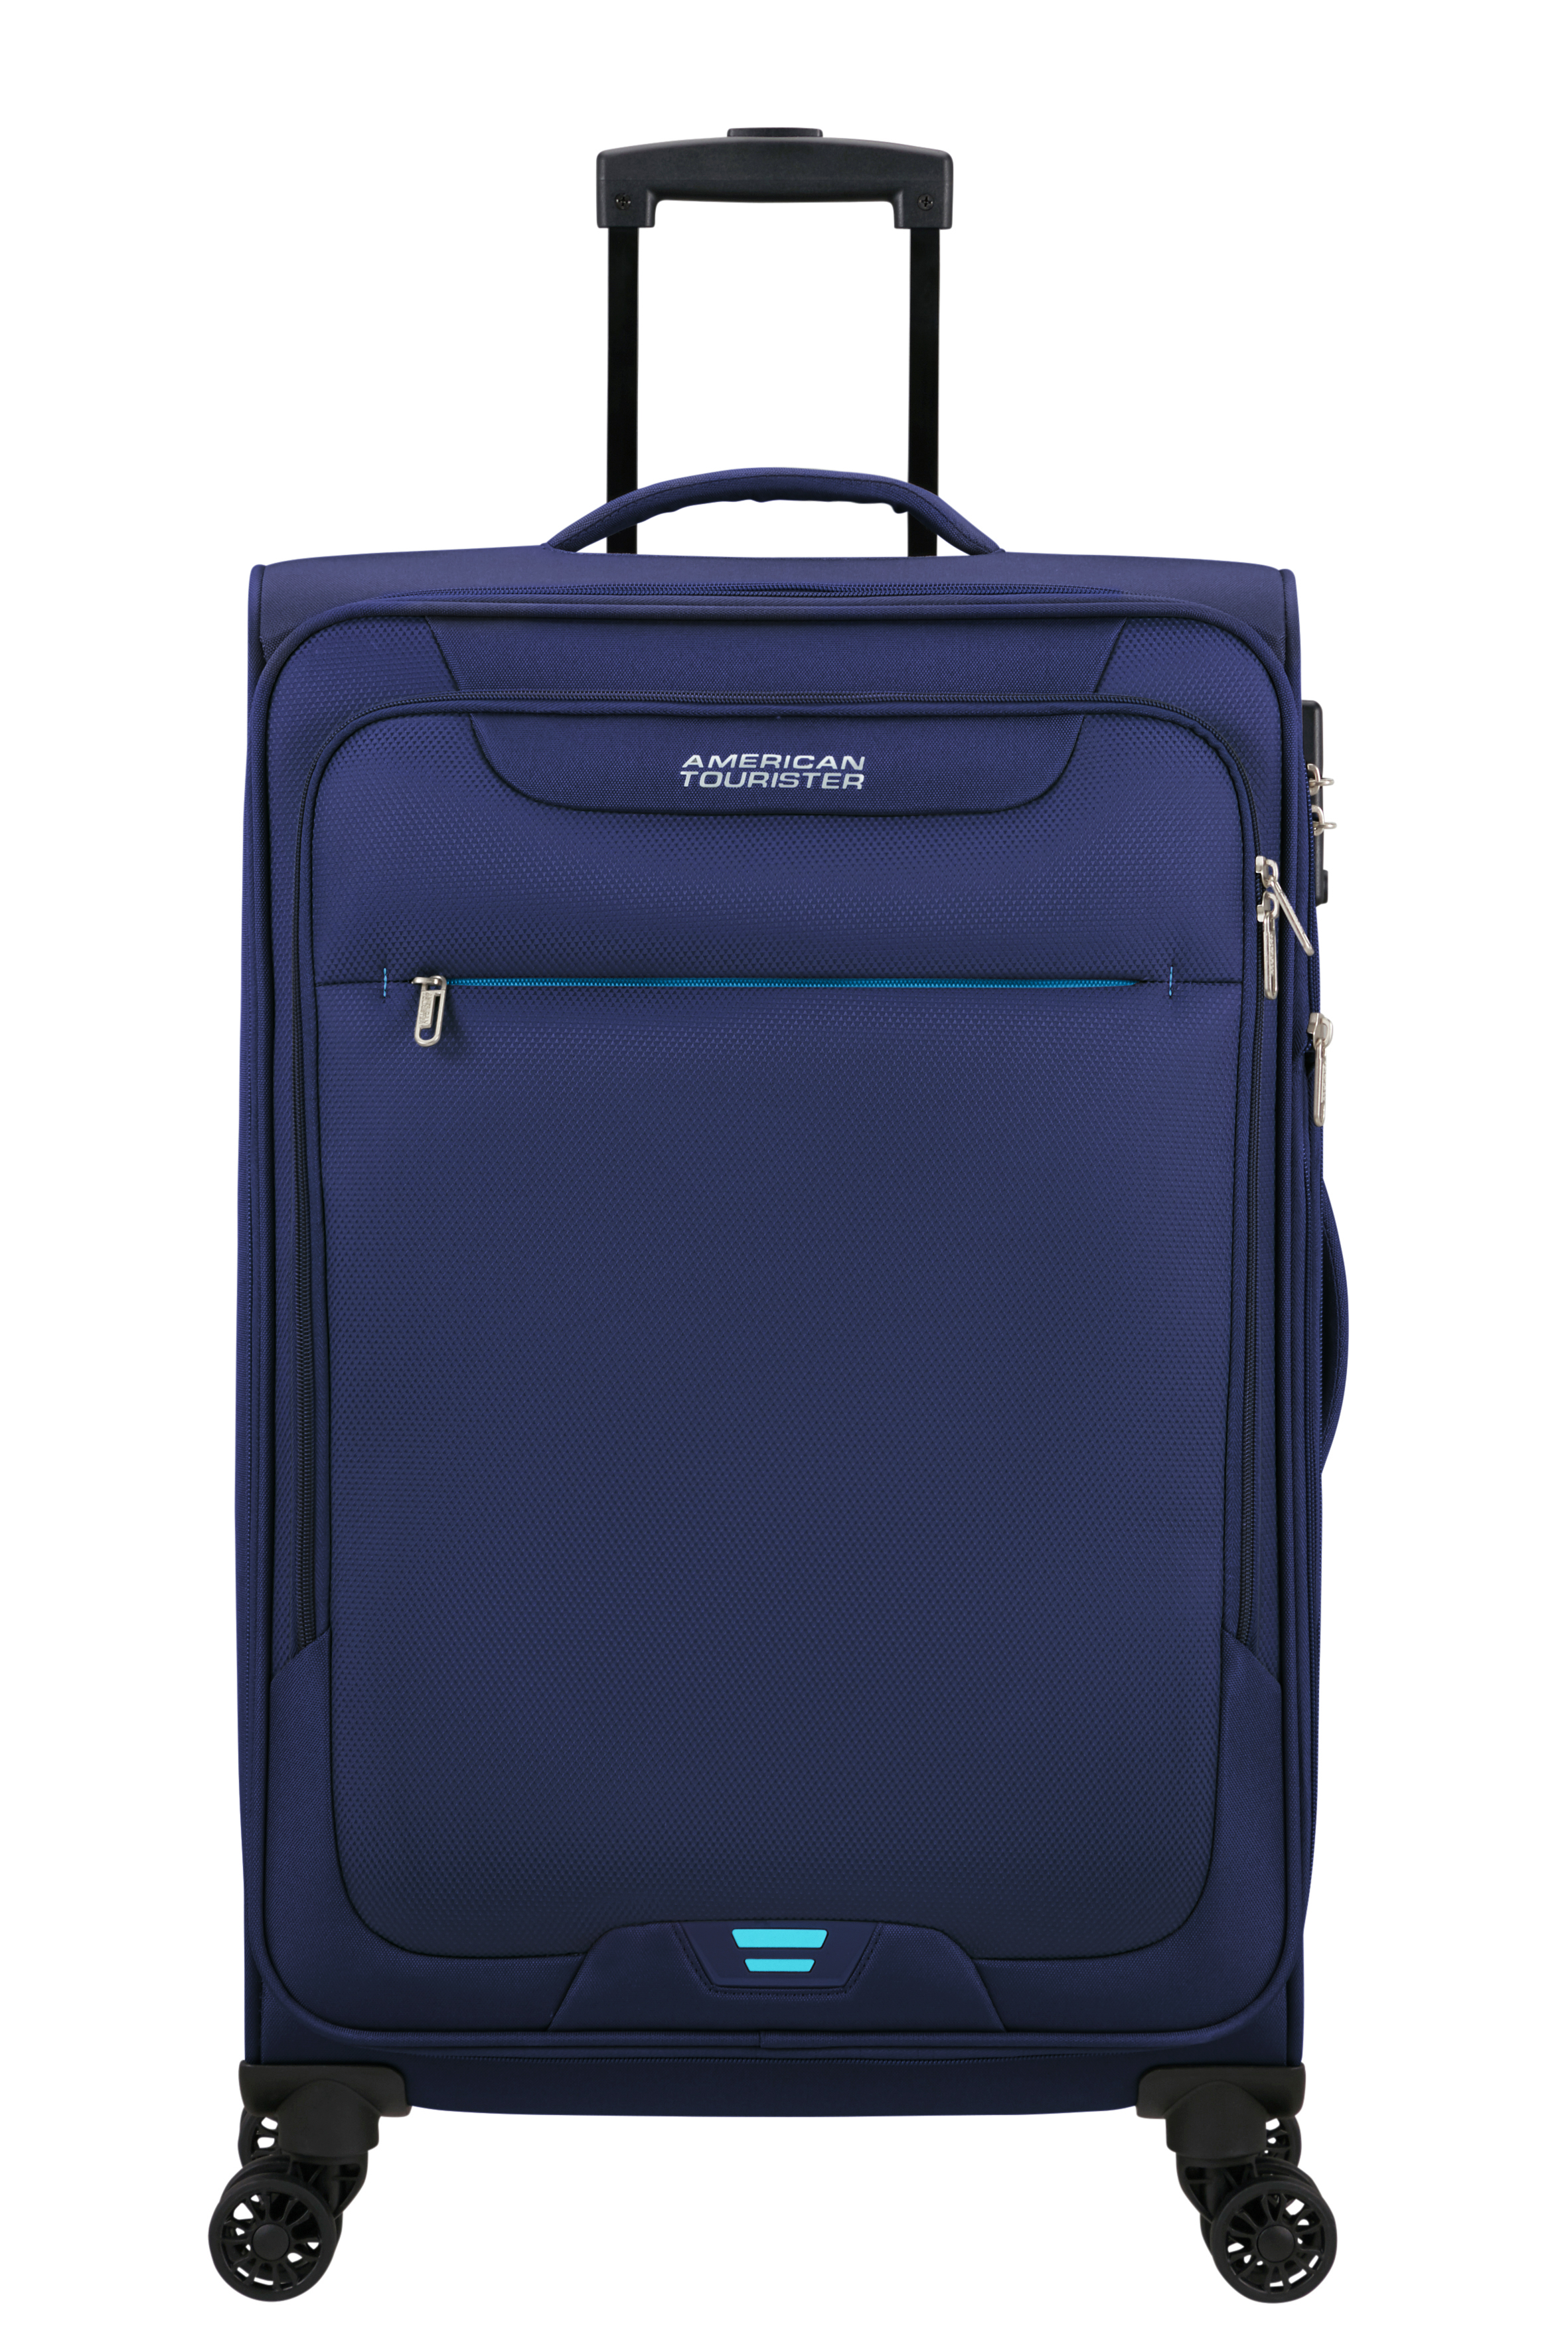 American Tourister Trolley Street Roll 65cm navy